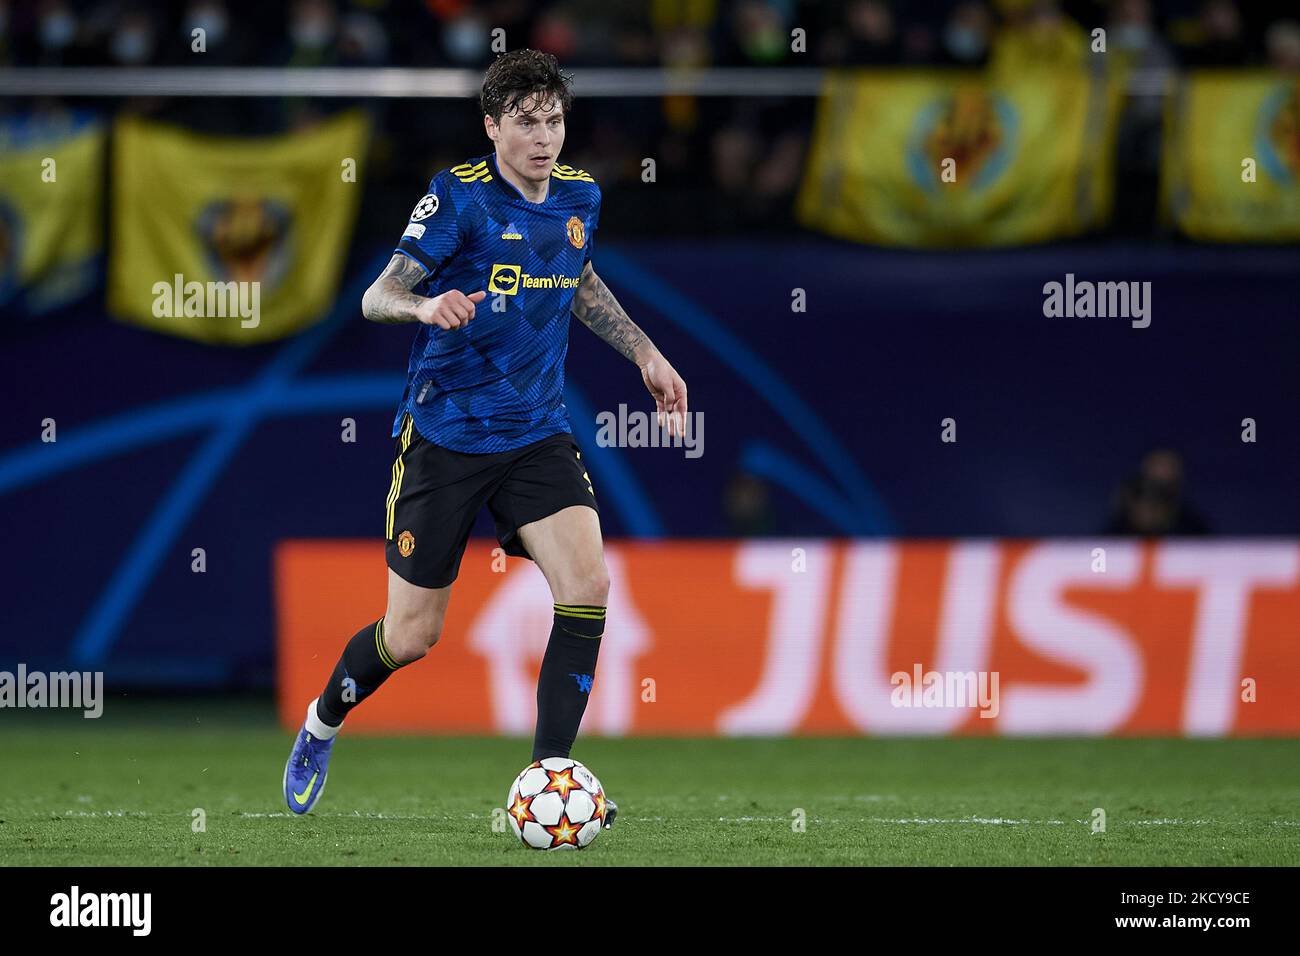 Victor Lindelof of Manchester United runs with the ball during the UEFA Champions League group F match between Villarreal CF and Manchester United at Estadio de la Ceramica on November 23, 2021 in Villarreal, Spain. (Photo by Jose Breton/Pics Action/NurPhoto) Stock Photo